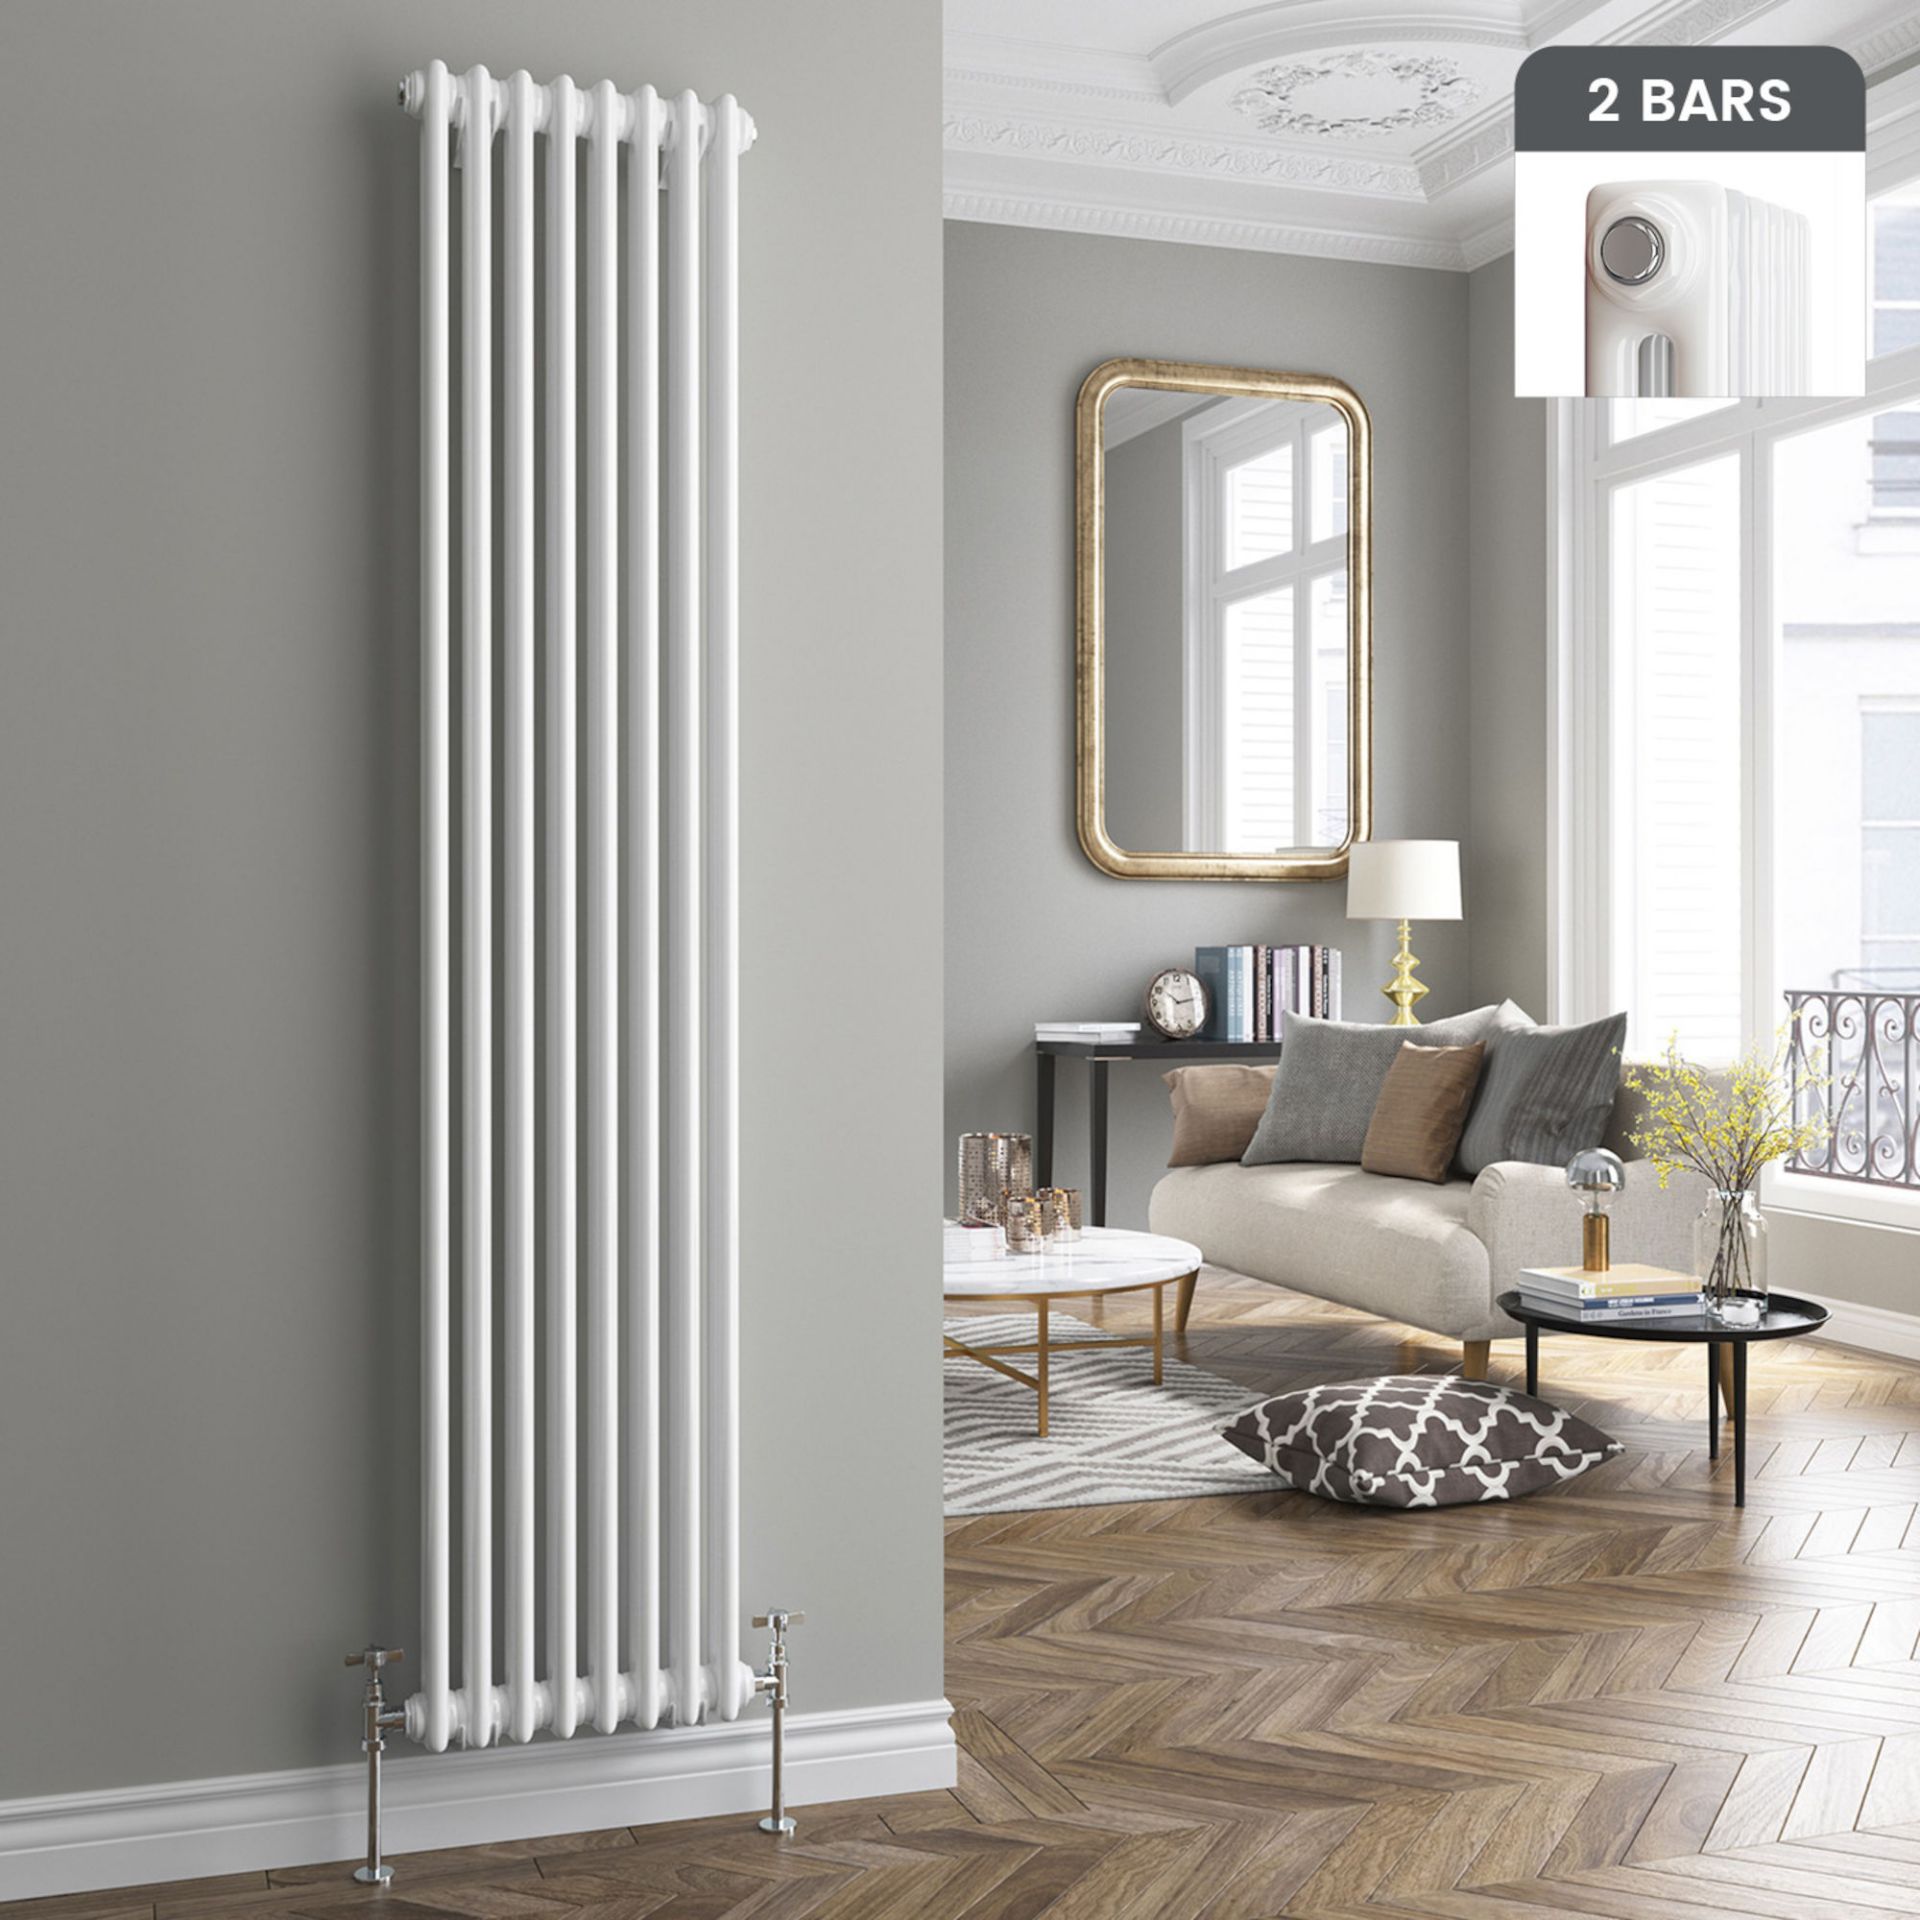 (RR86) 2000x490mm White Double Panel Vertical Colosseum Traditional Radiator. RRP £479.99.For ... ( - Image 3 of 3